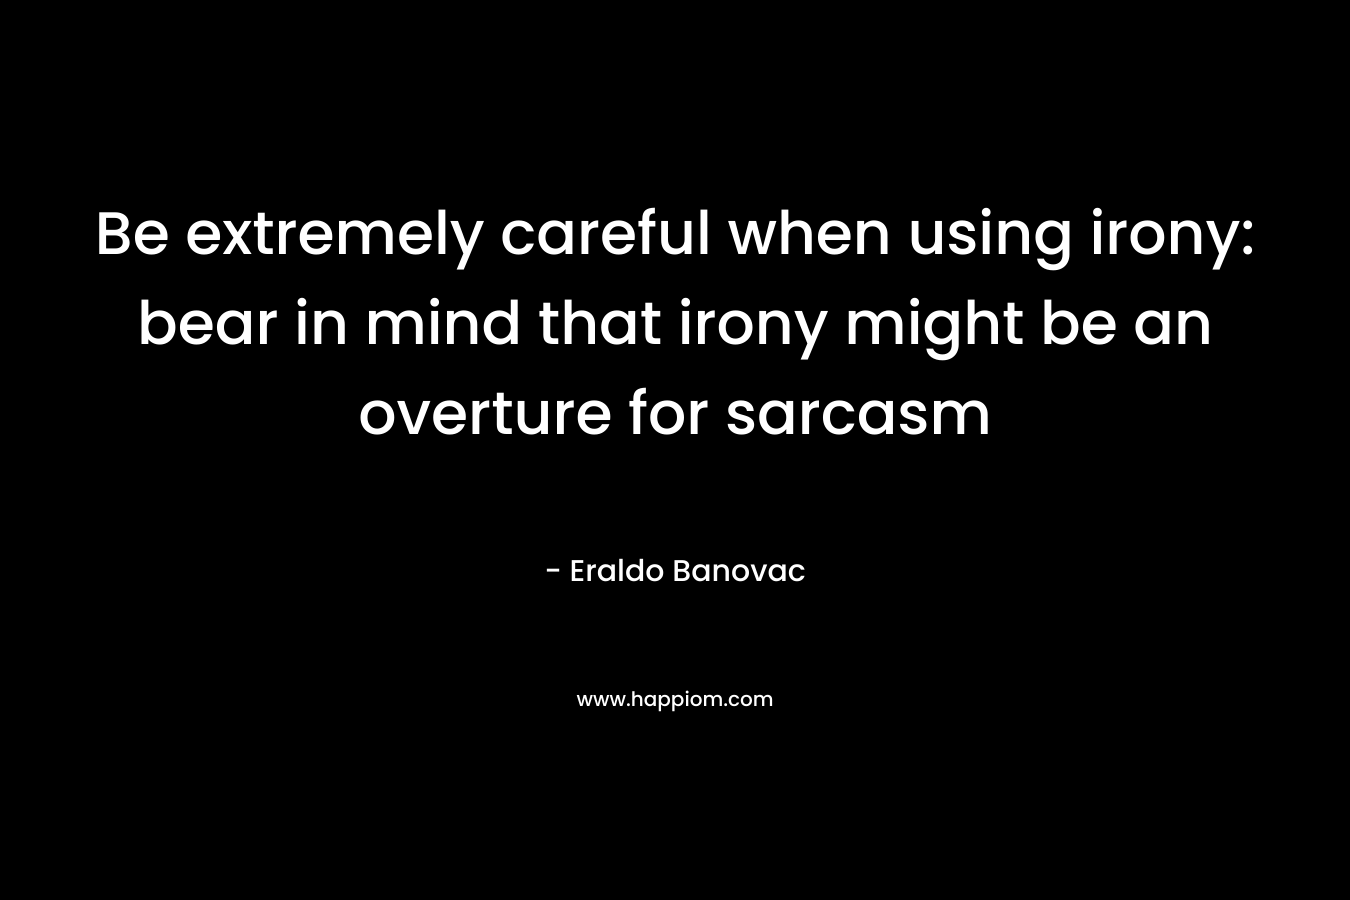 Be extremely careful when using irony: bear in mind that irony might be an overture for sarcasm